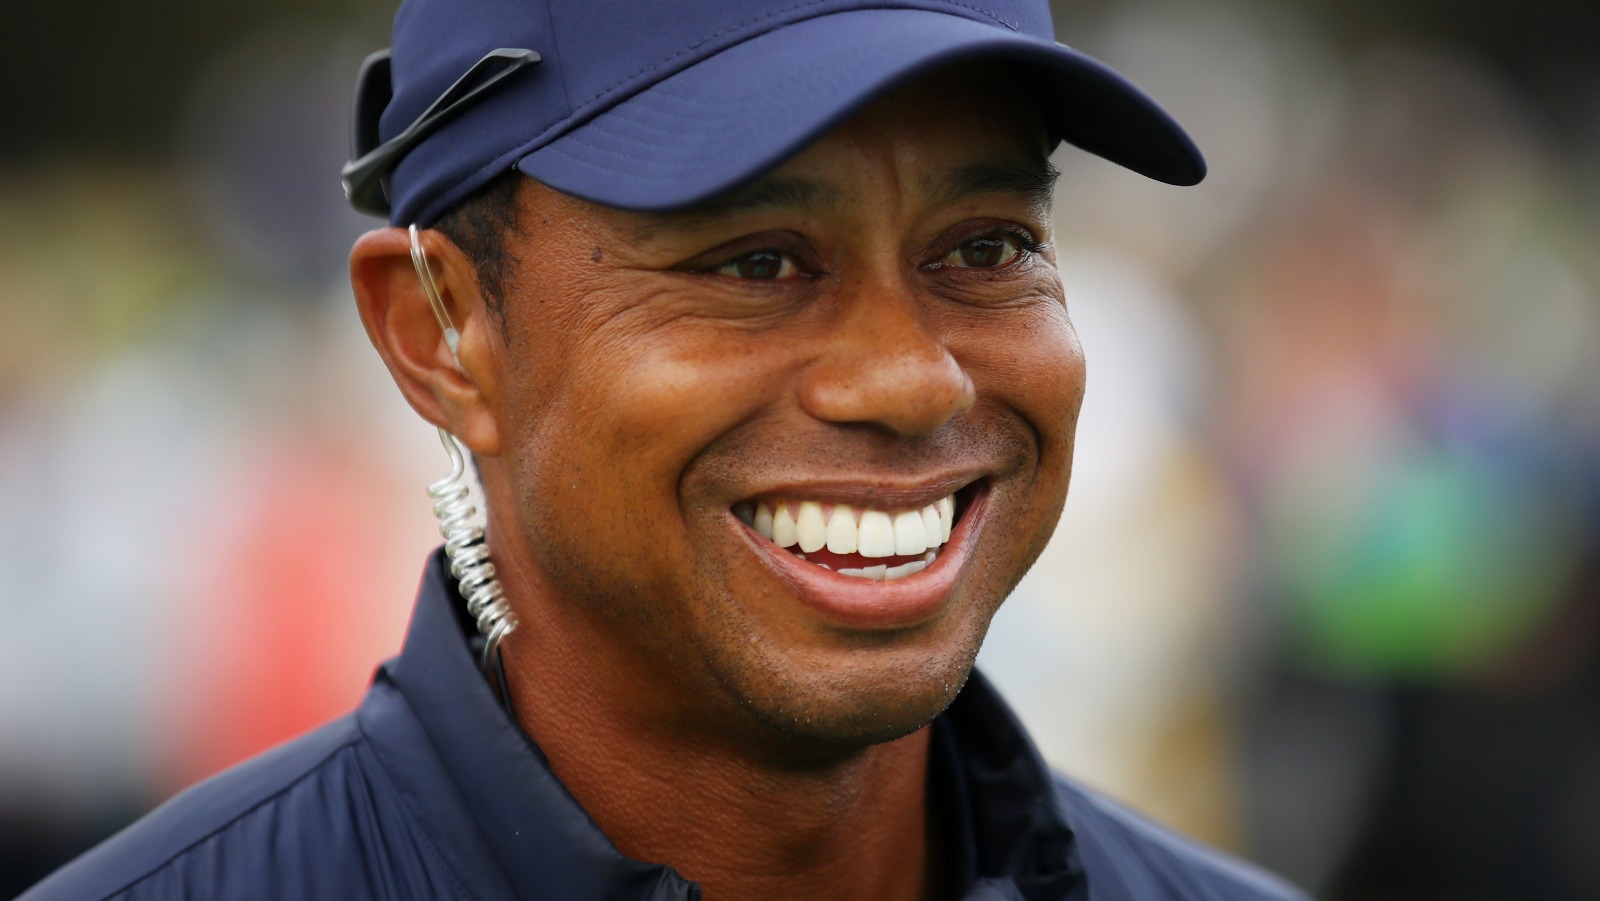 Tiger Woods shows he has no shame with Nike ad that features